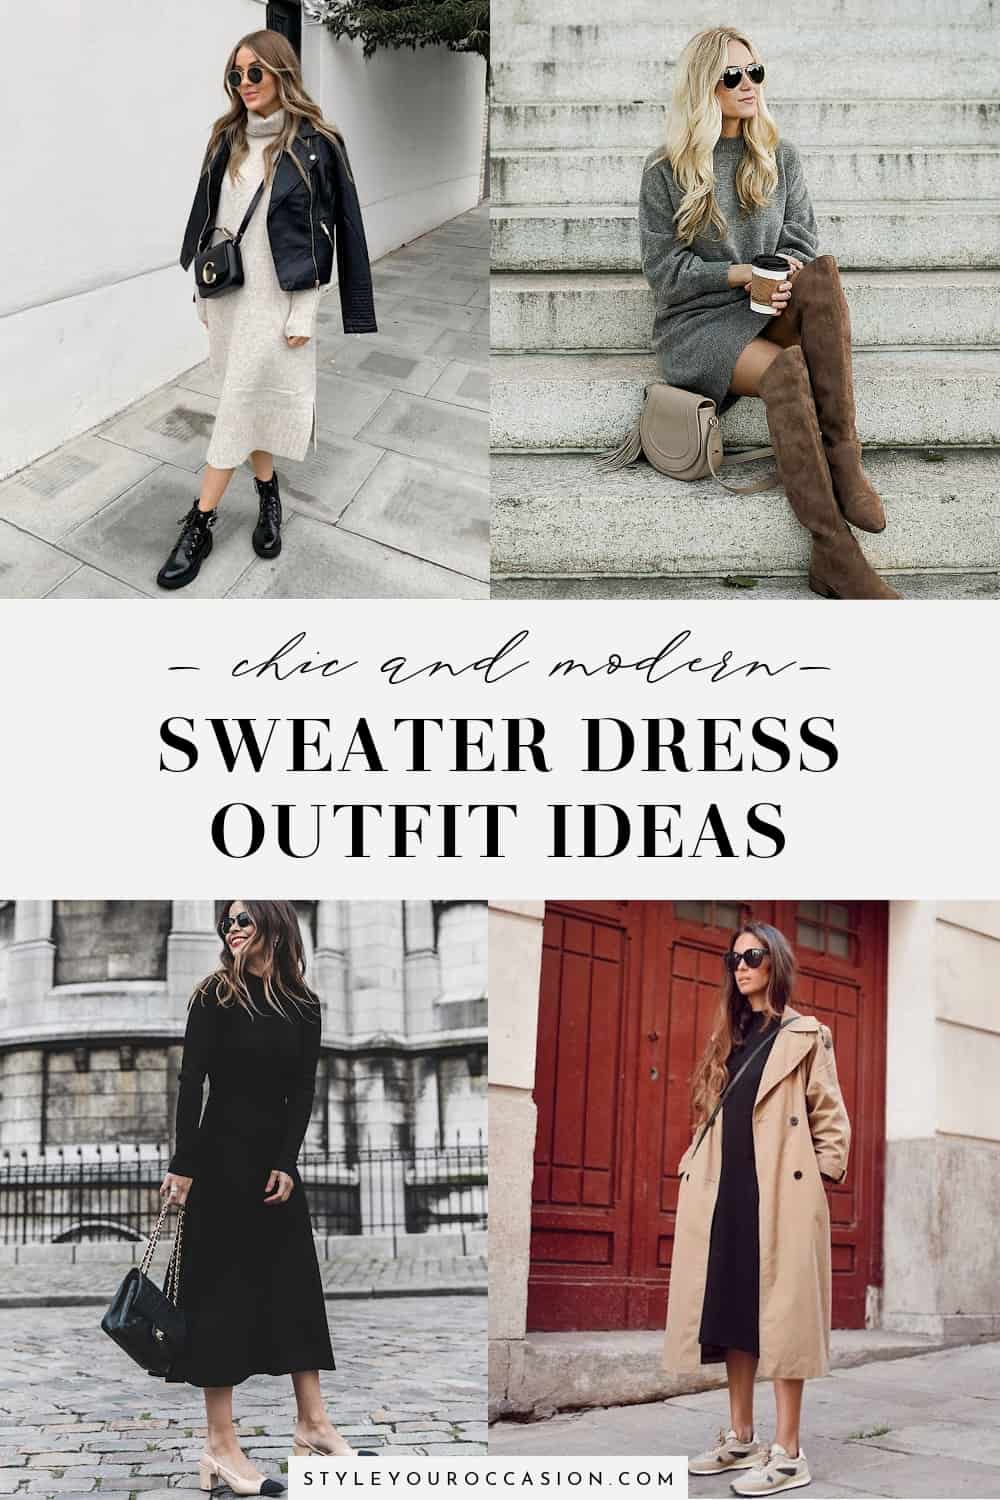 The Best Shoes To Wear With Sweater Dresses + 10 *Chic* Outfits!